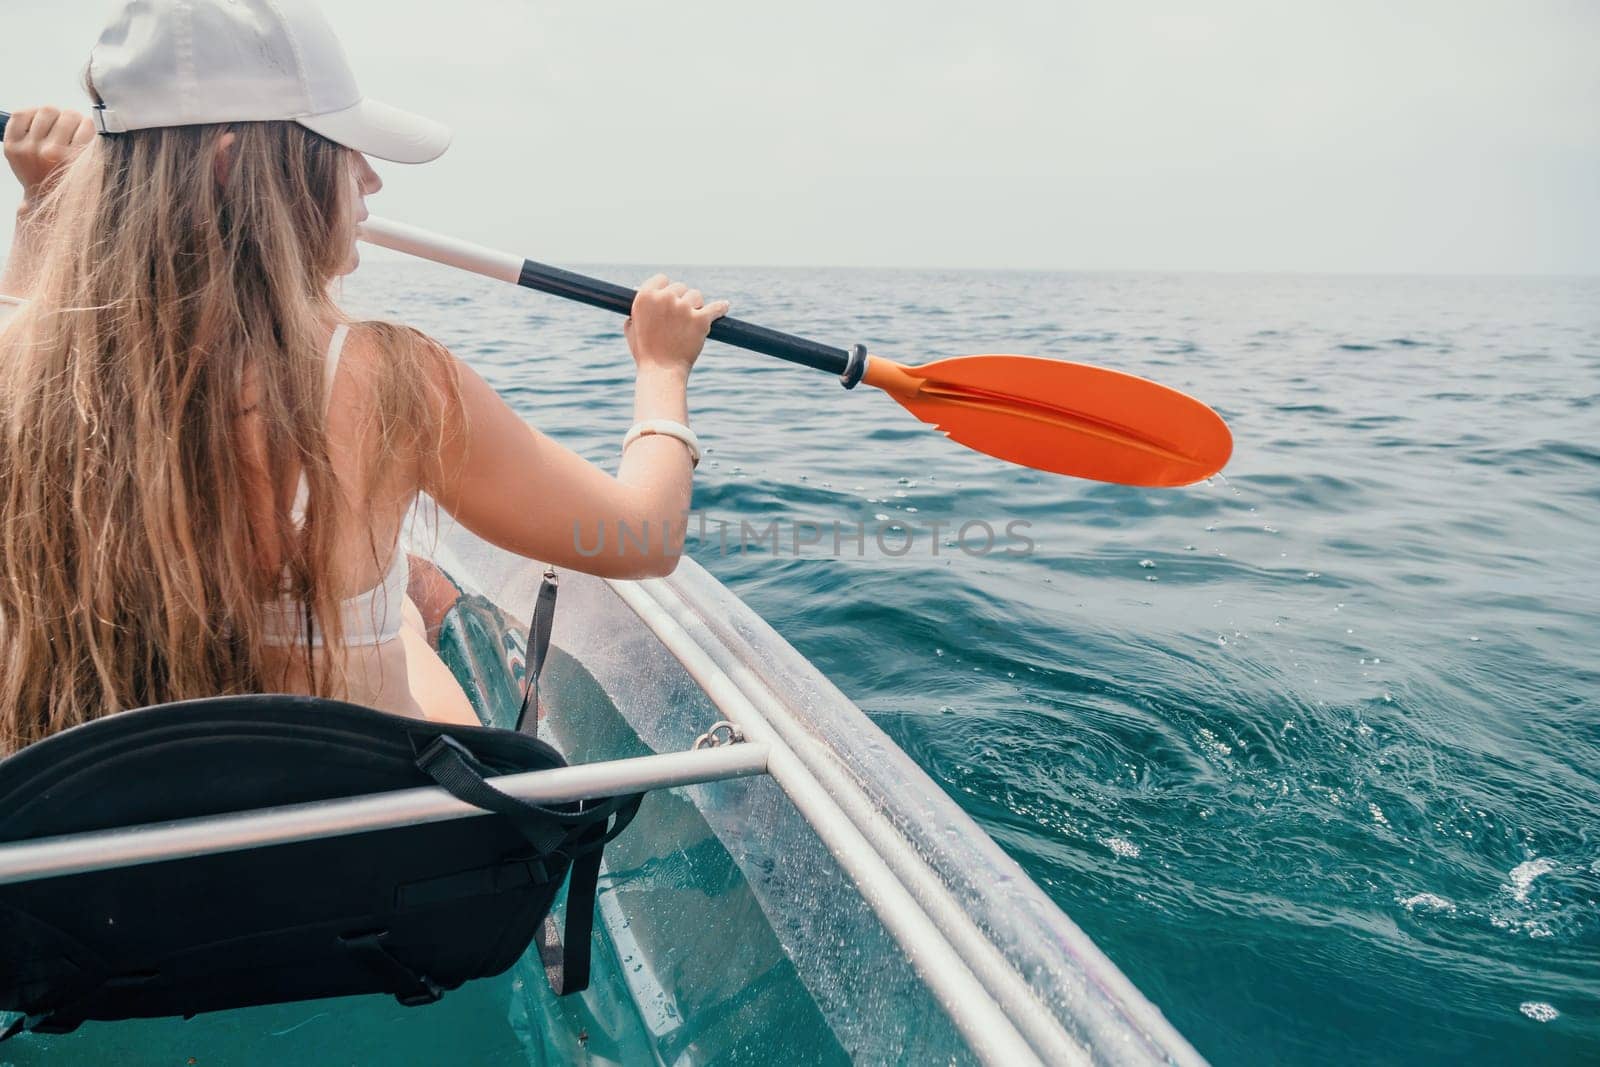 Woman in kayak back view. Happy young woman with long hair floating in transparent kayak on the crystal clear sea. Summer holiday vacation and cheerful female people having fun on the boat.